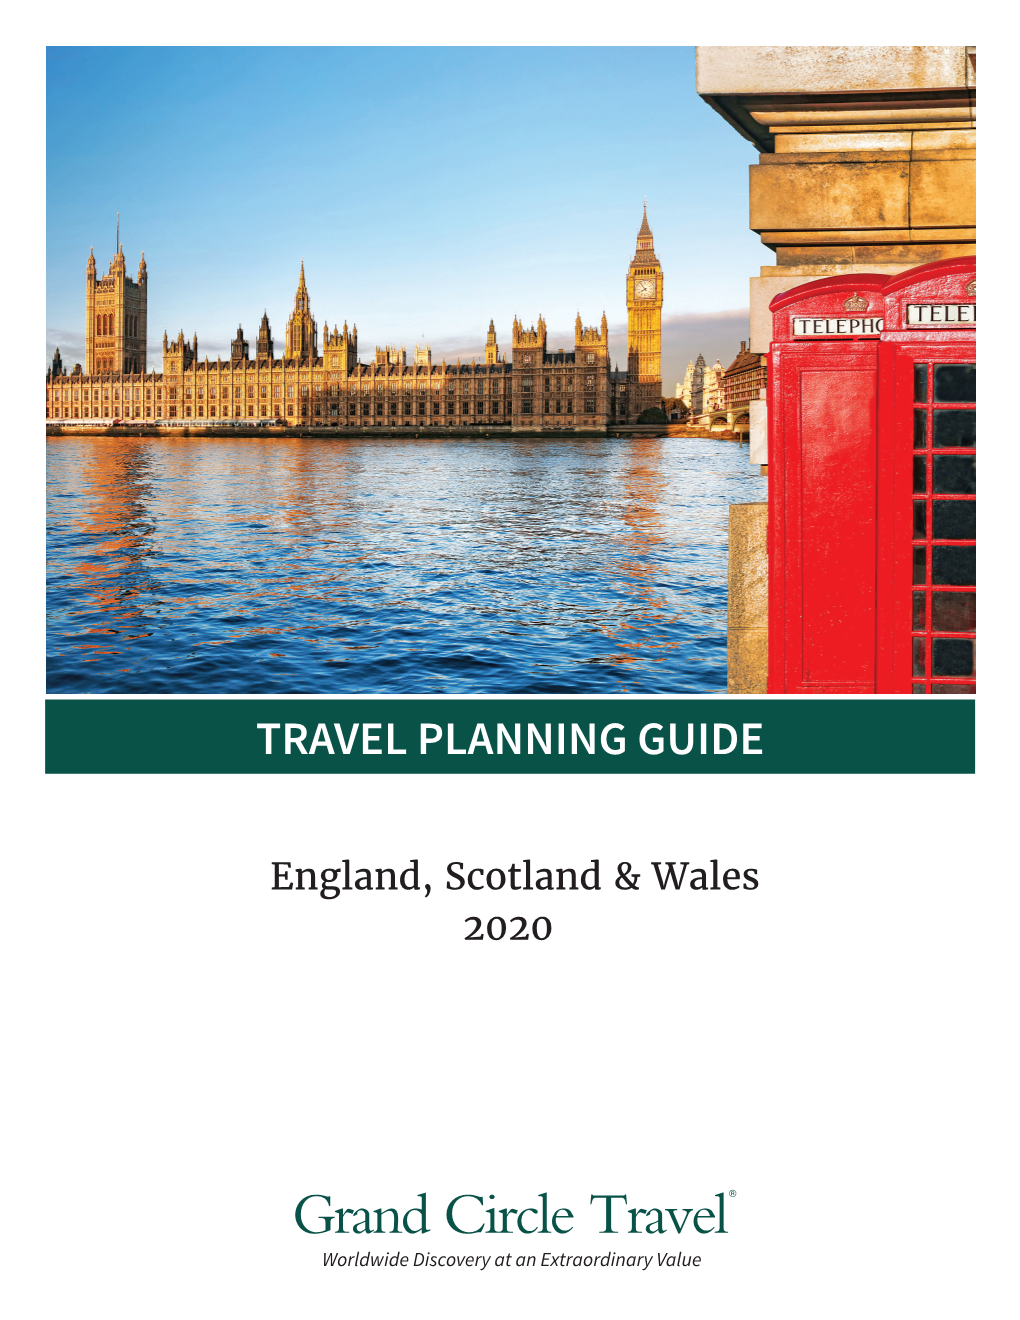 Read Travel Planning Guide